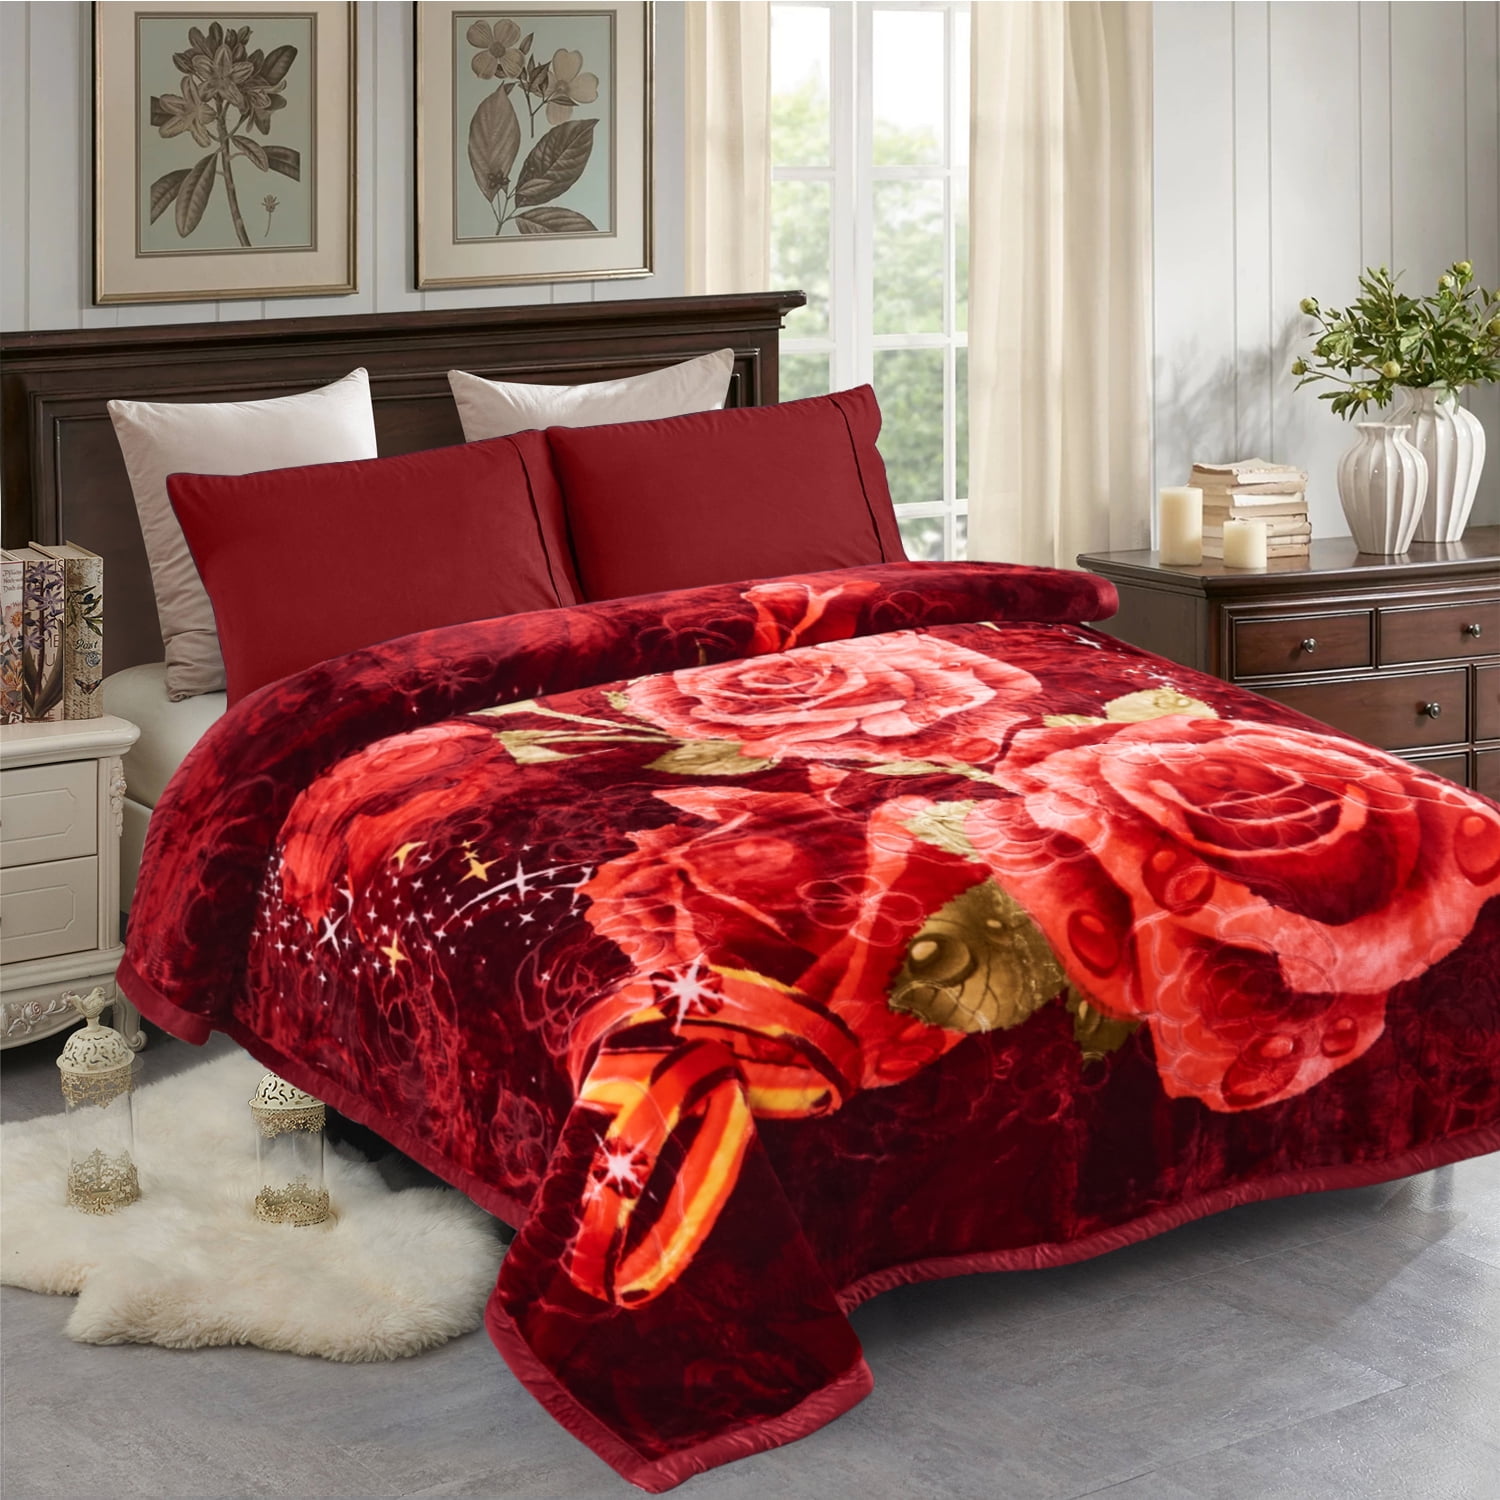 Luxury Heavy 2ply Soft Thick Warm Bed Blanket King Double Flannel Blanket HOT 